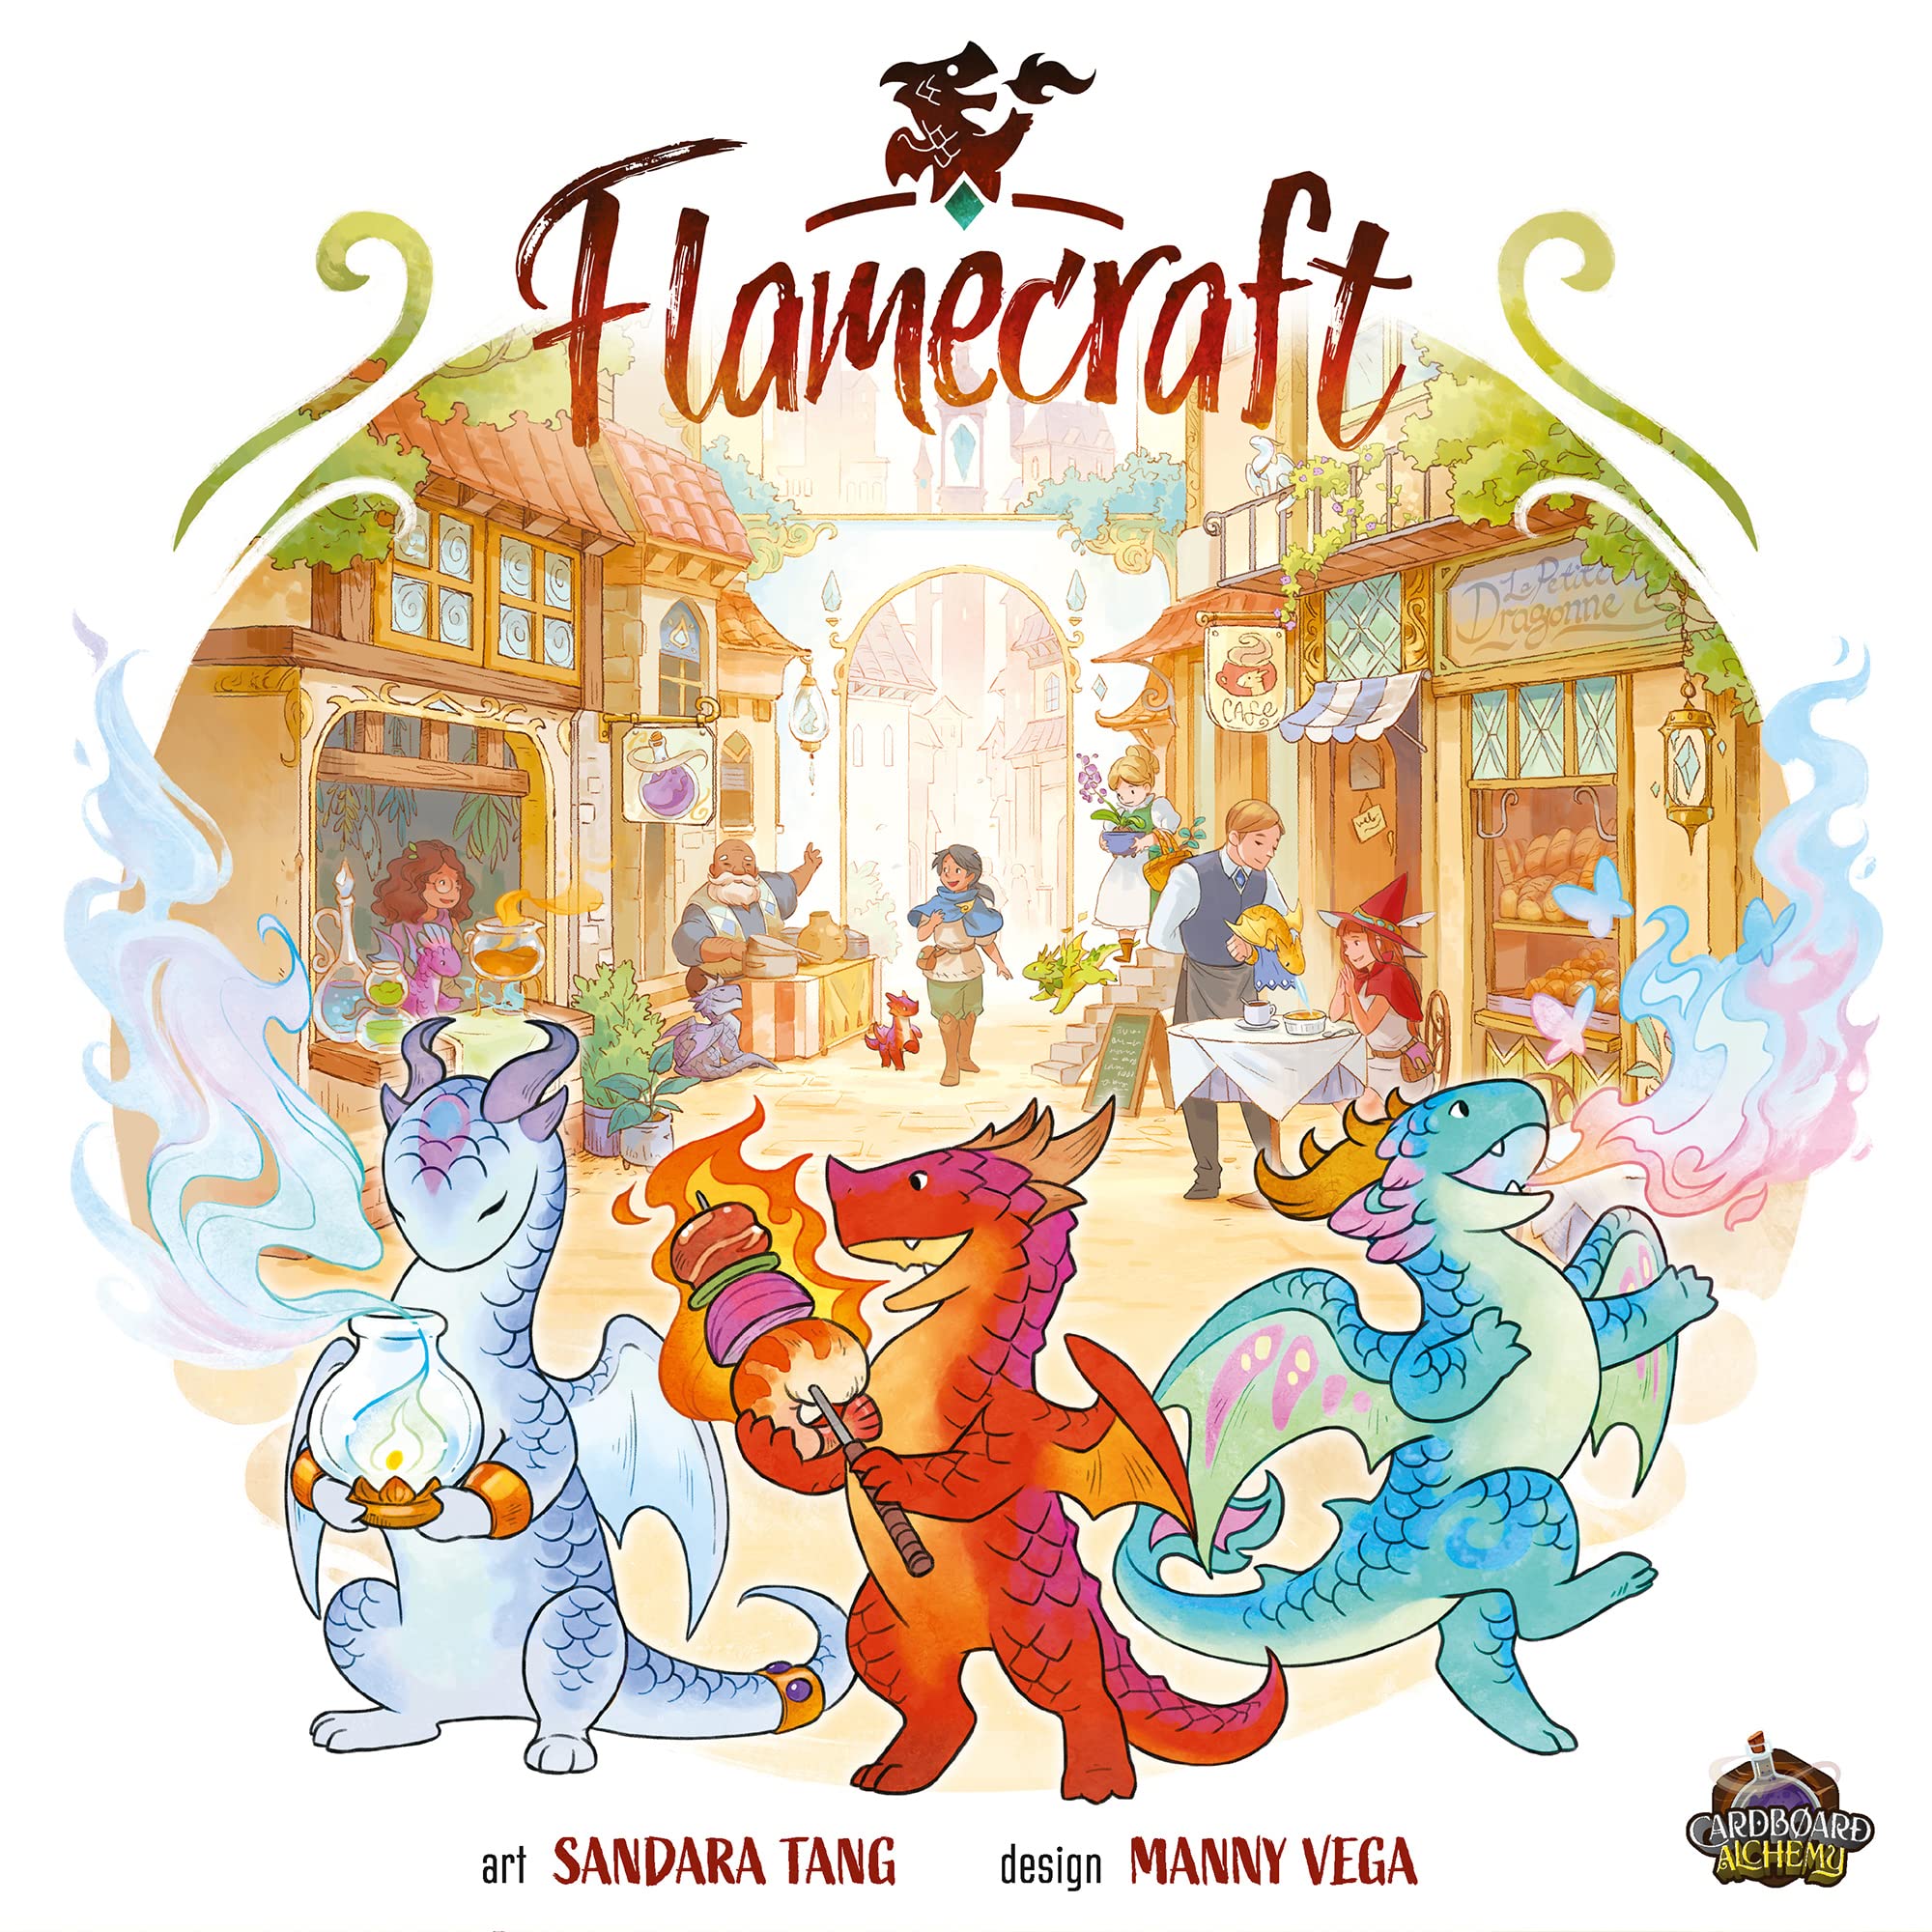 Flamecraft Board Game | Strategy Game | Dragon Game | Fantasy Game | Fun Family Game for Kids and Adults | Ages 10+ | 1-5 Players | Average Playtime 60 Minutes | Made by Lucky Duck Games